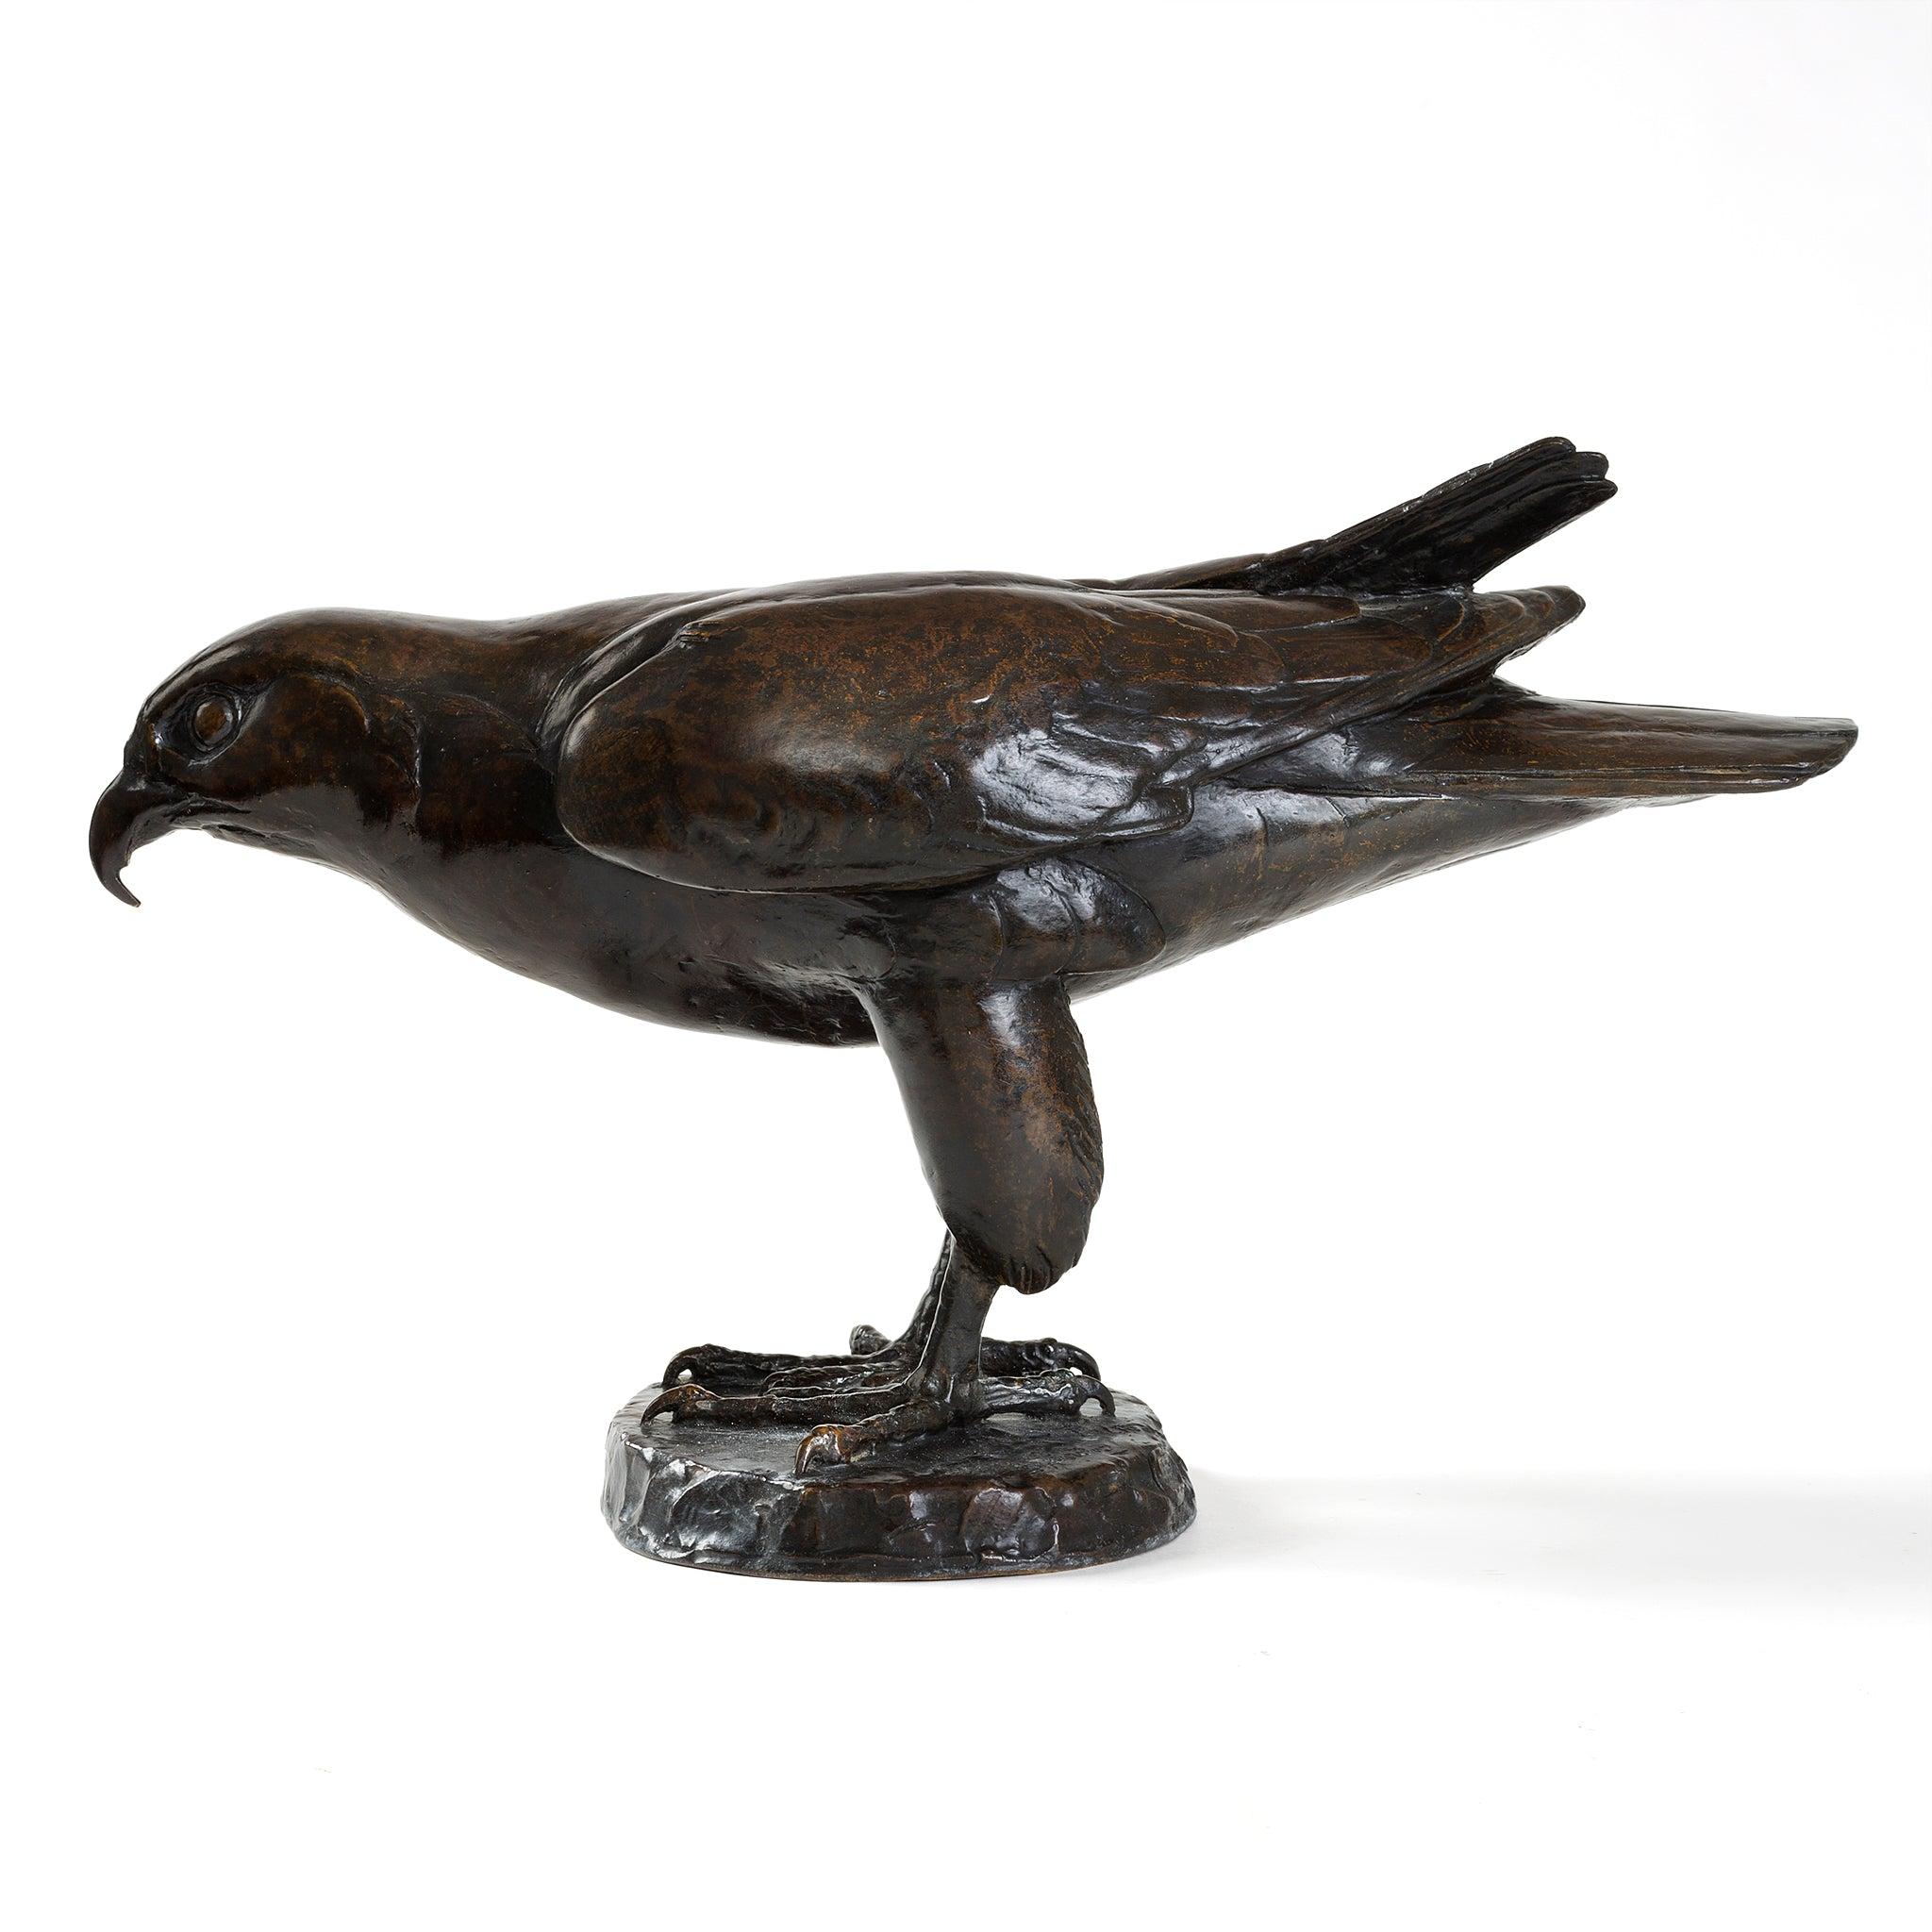 This naturalistic bronze sculpture of a perching falcon was created in 1956 by the Swiss-French animalier Édouard Sandoz. The bird of prey is depicted in a dynamic pose at the edge of a rocky perch, perhaps on the verge of opening its wings, its